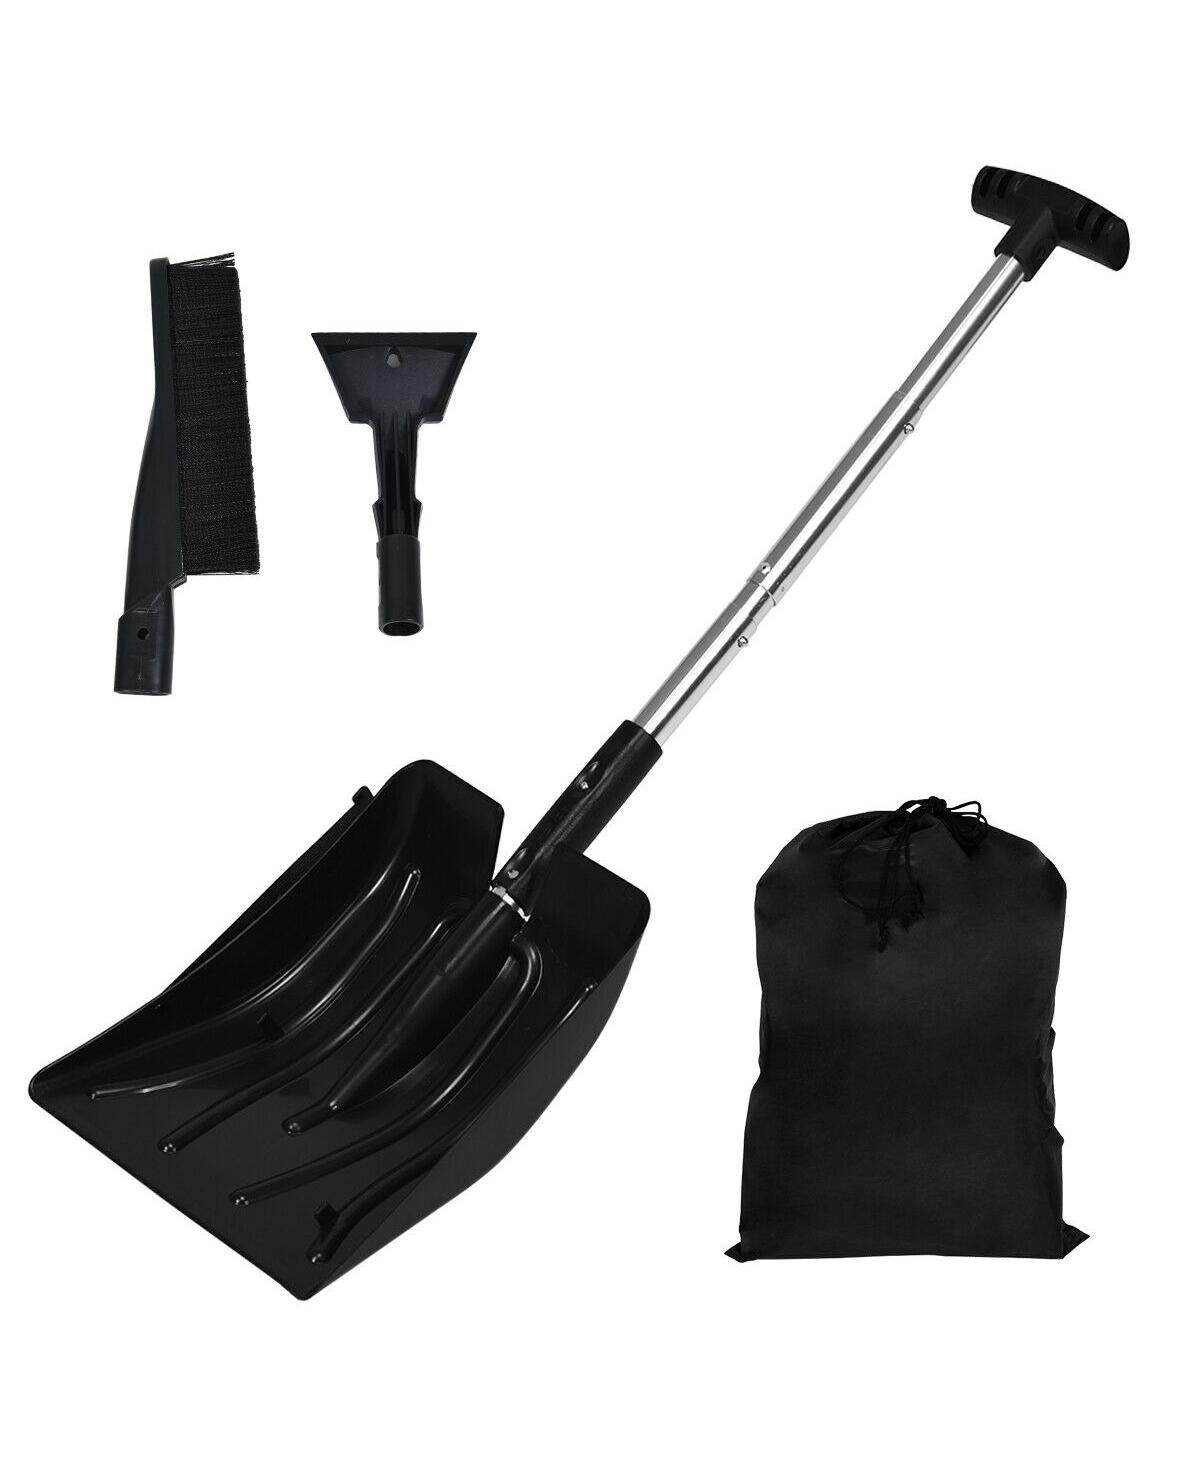 3-in-1 Snow Shovel with Ice Scraper and Snow Brush - Open Miscellaneous